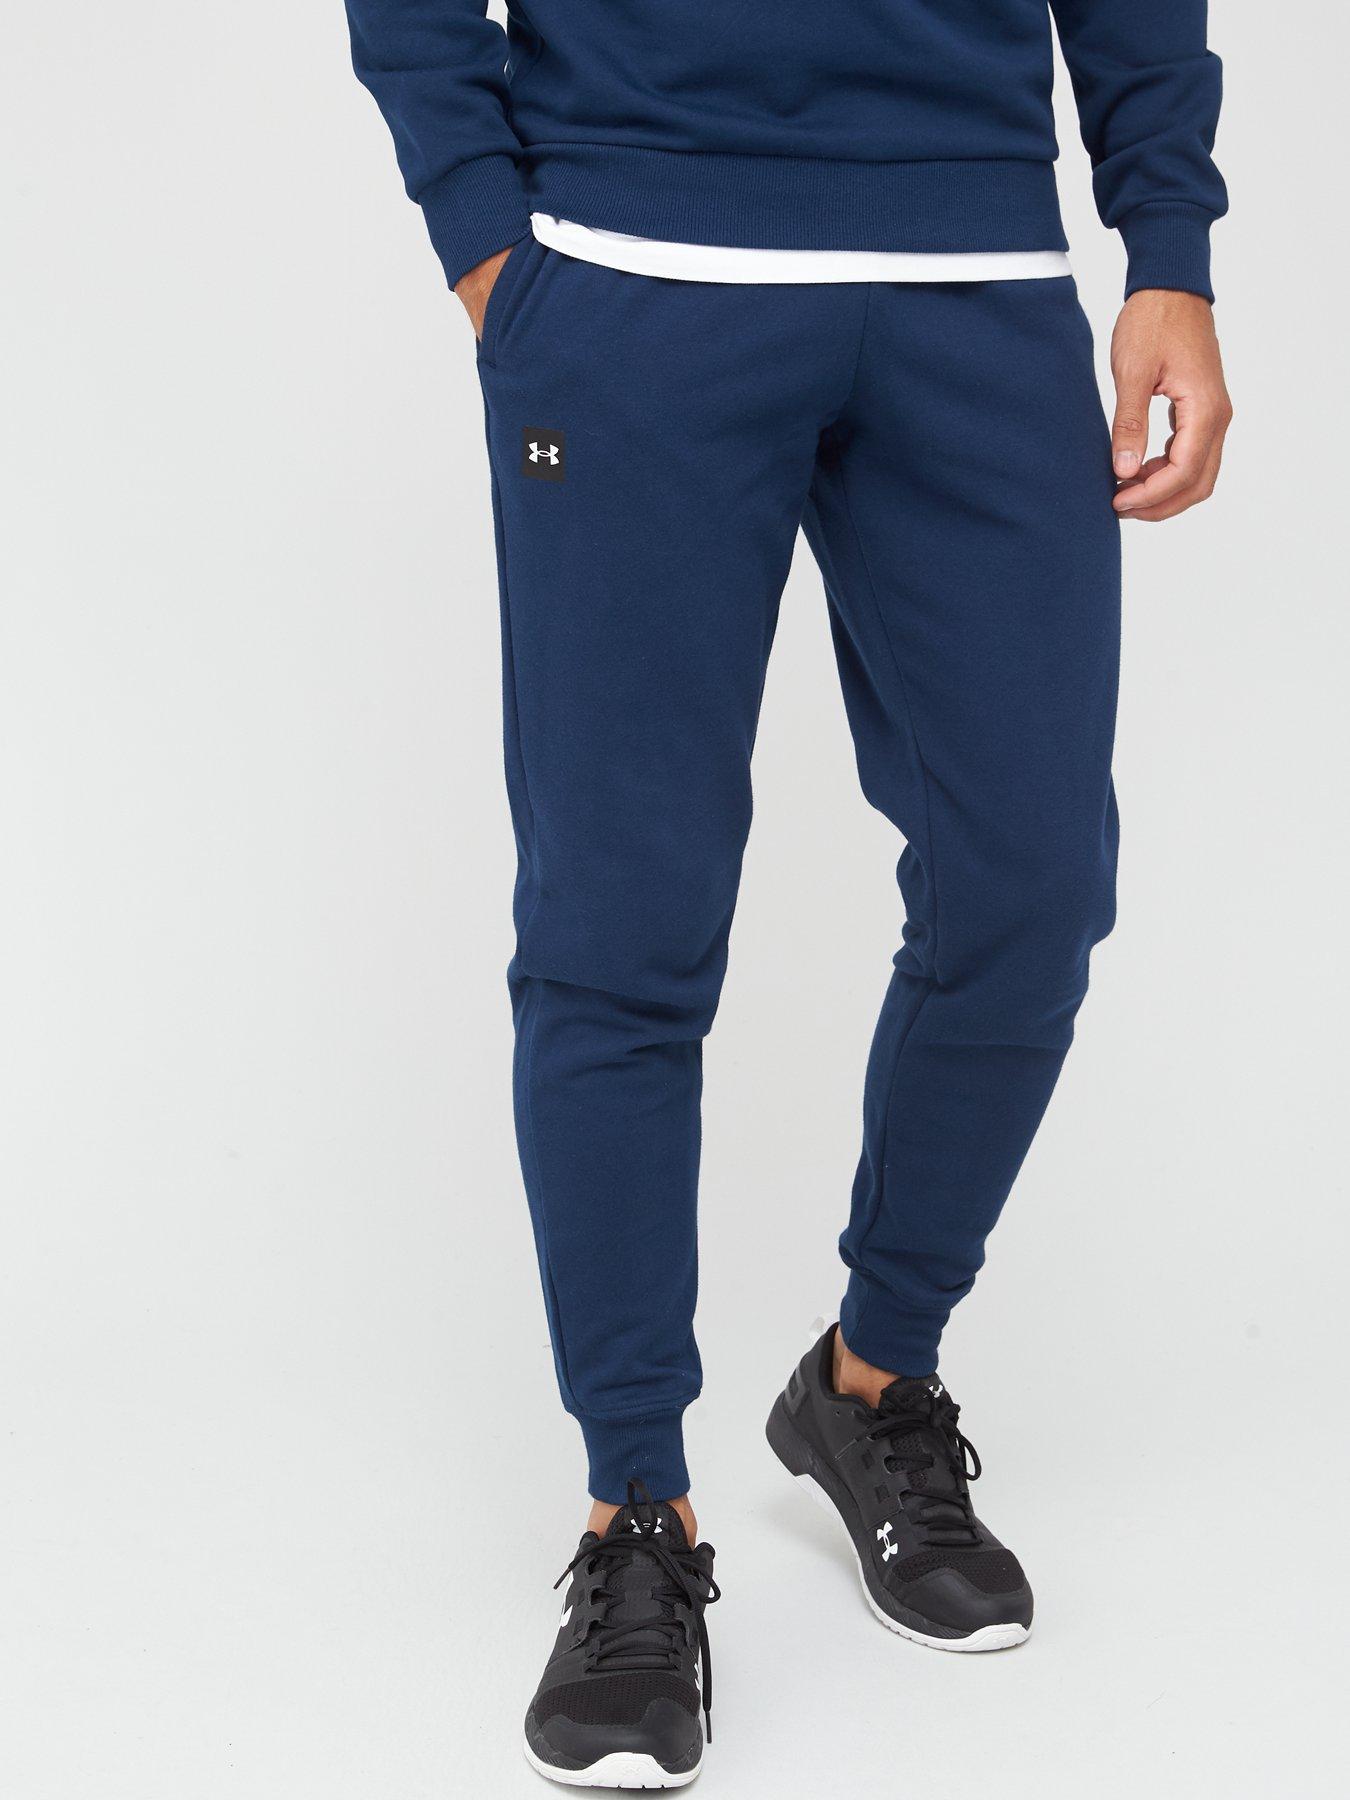 Under Armour Training Rival fleece joggers in navy